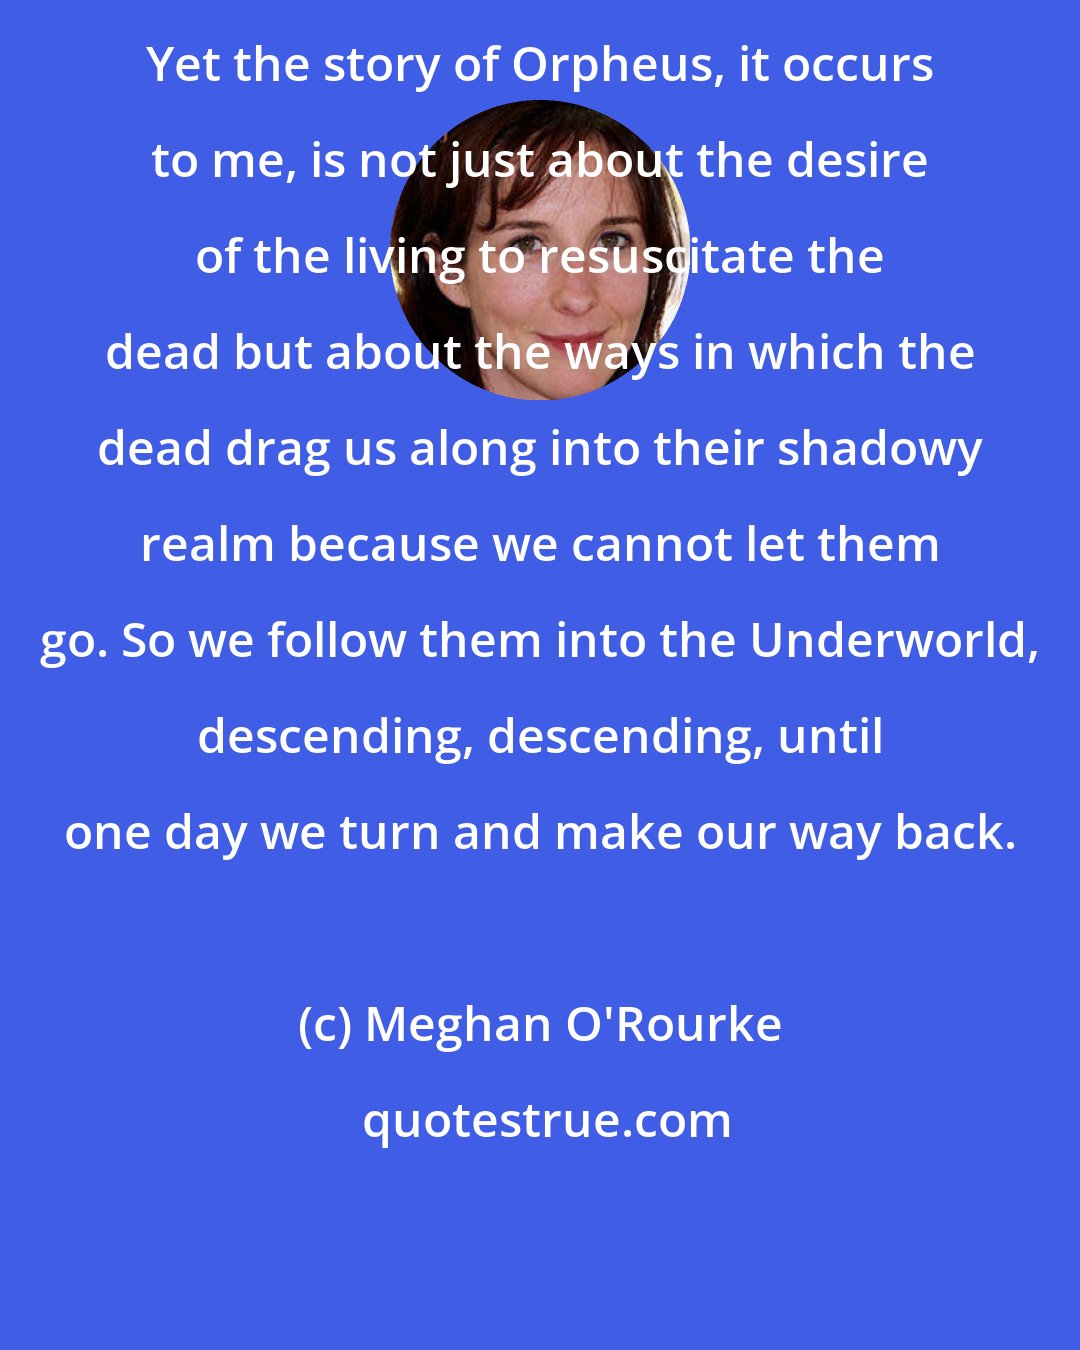 Meghan O'Rourke: Yet the story of Orpheus, it occurs to me, is not just about the desire of the living to resuscitate the dead but about the ways in which the dead drag us along into their shadowy realm because we cannot let them go. So we follow them into the Underworld, descending, descending, until one day we turn and make our way back.